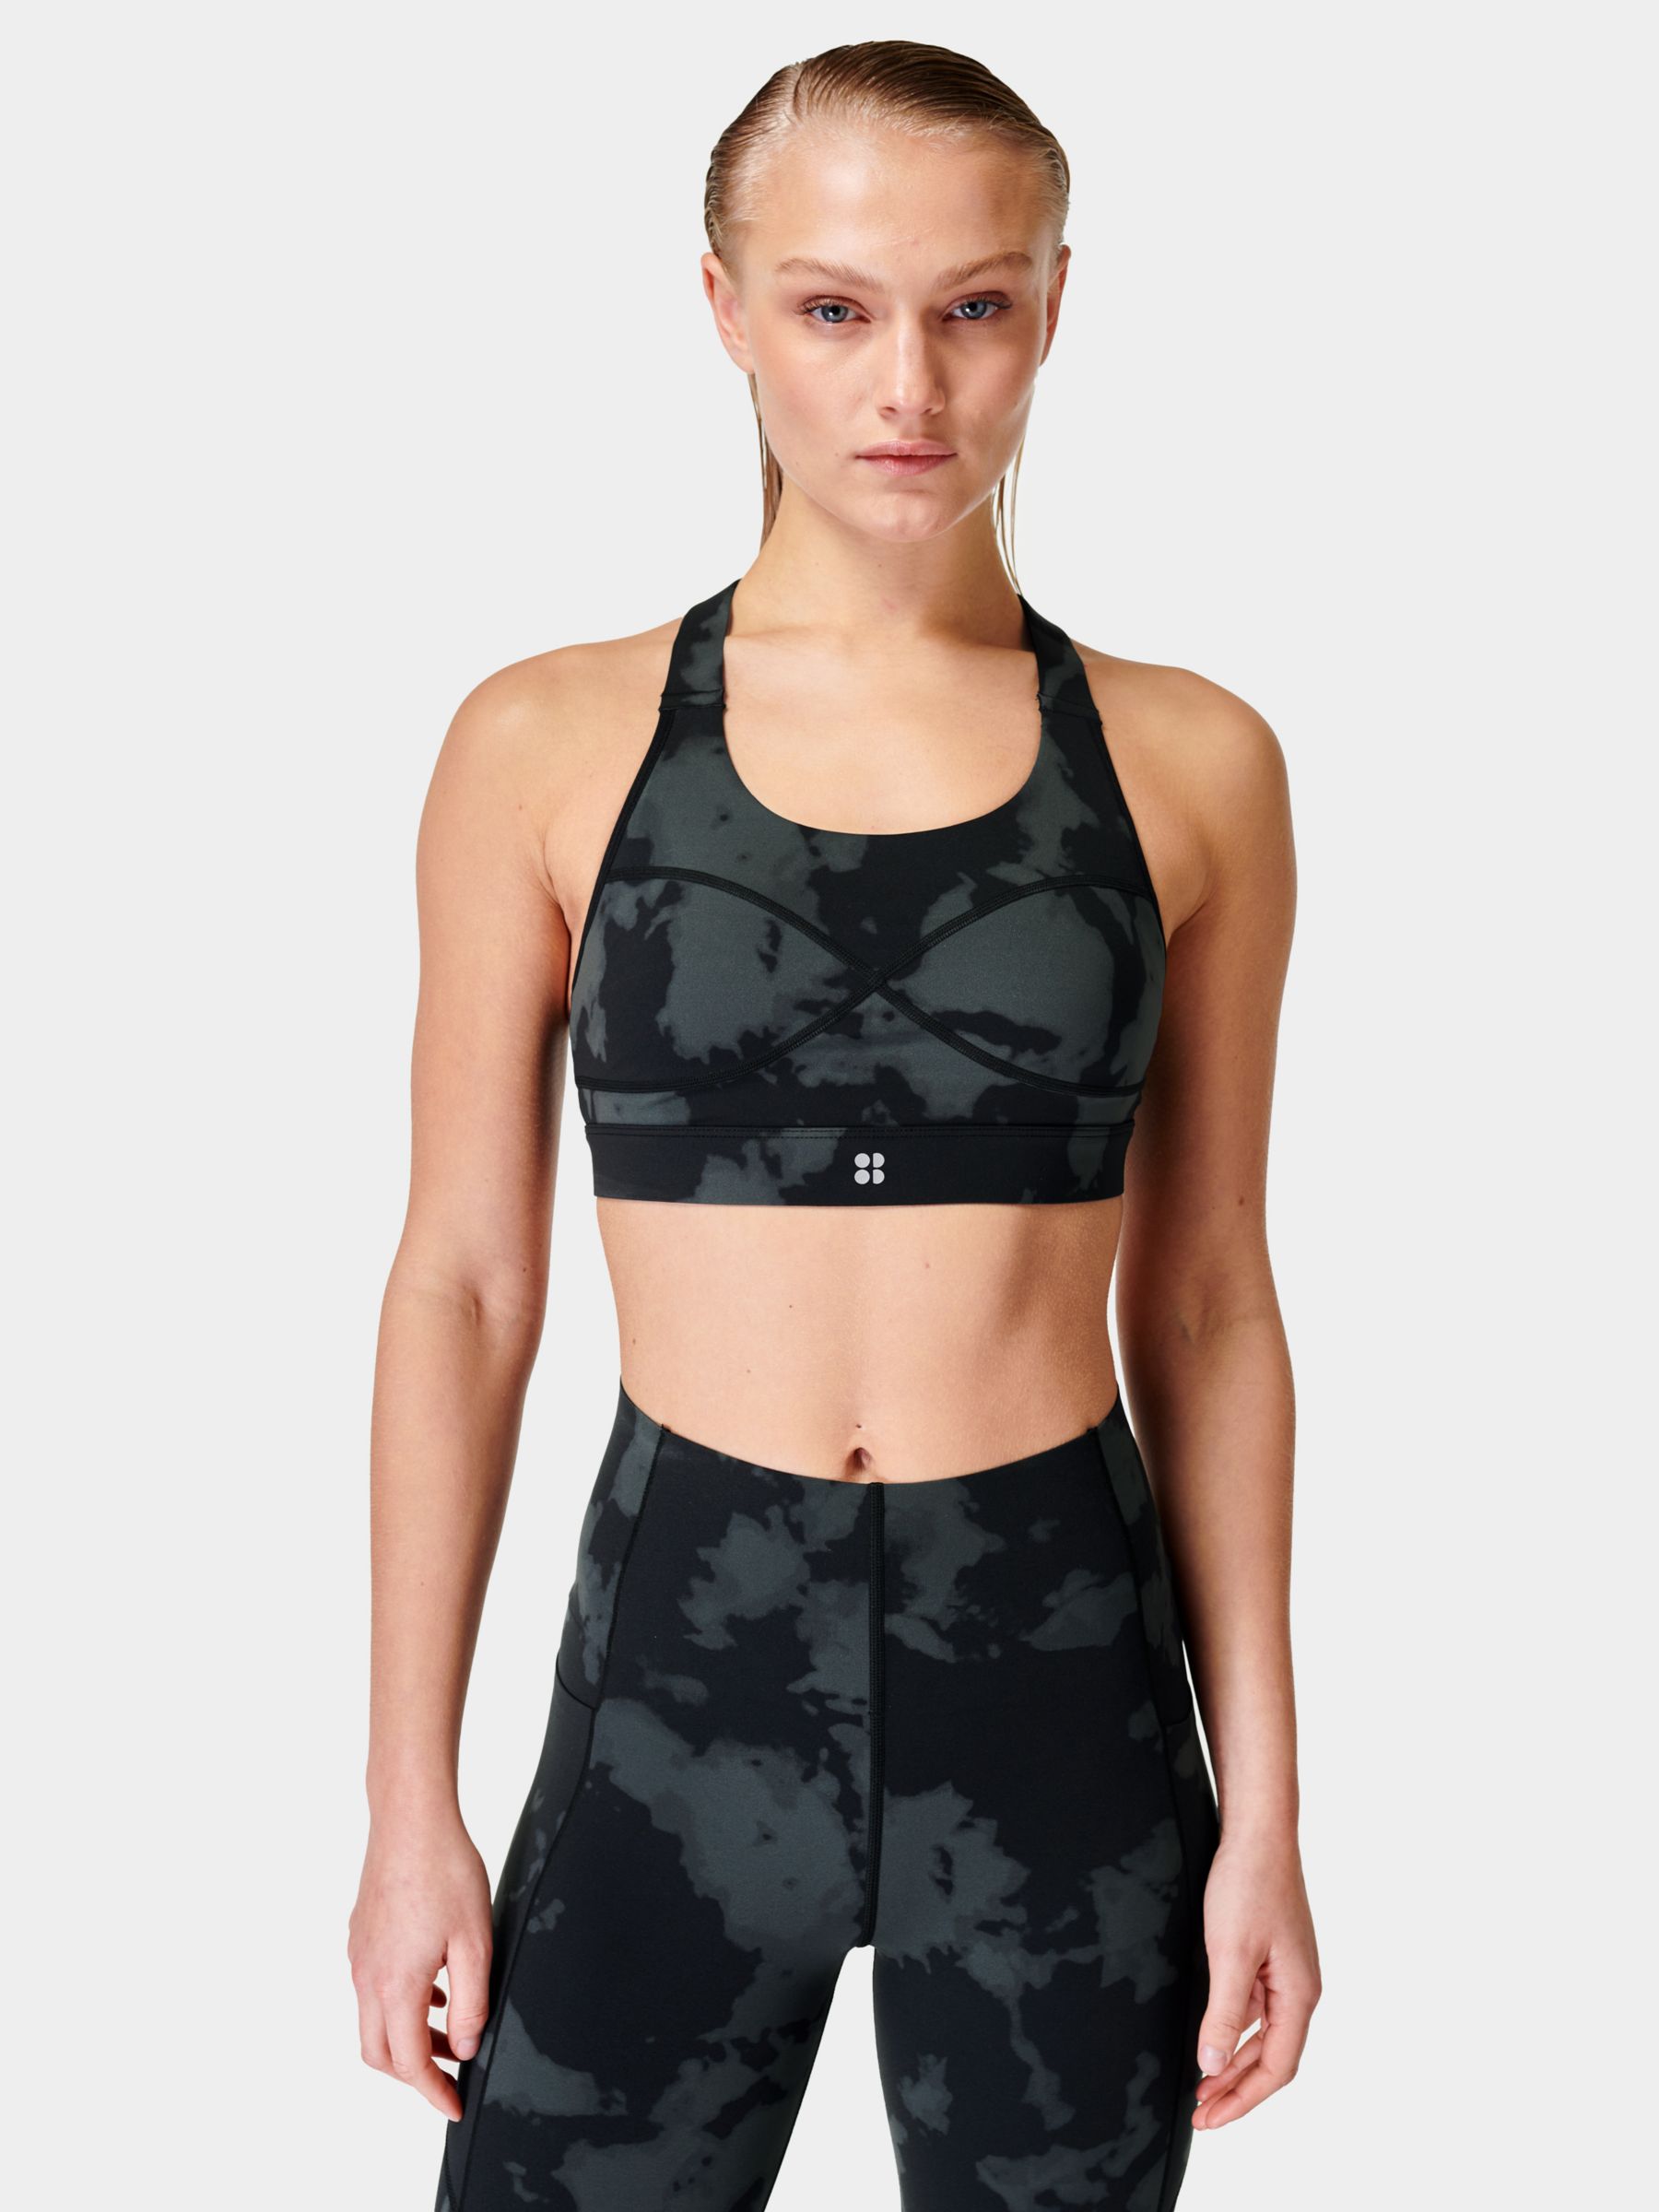 Panache Wired Sports Bra, Digtal Bloom at John Lewis & Partners